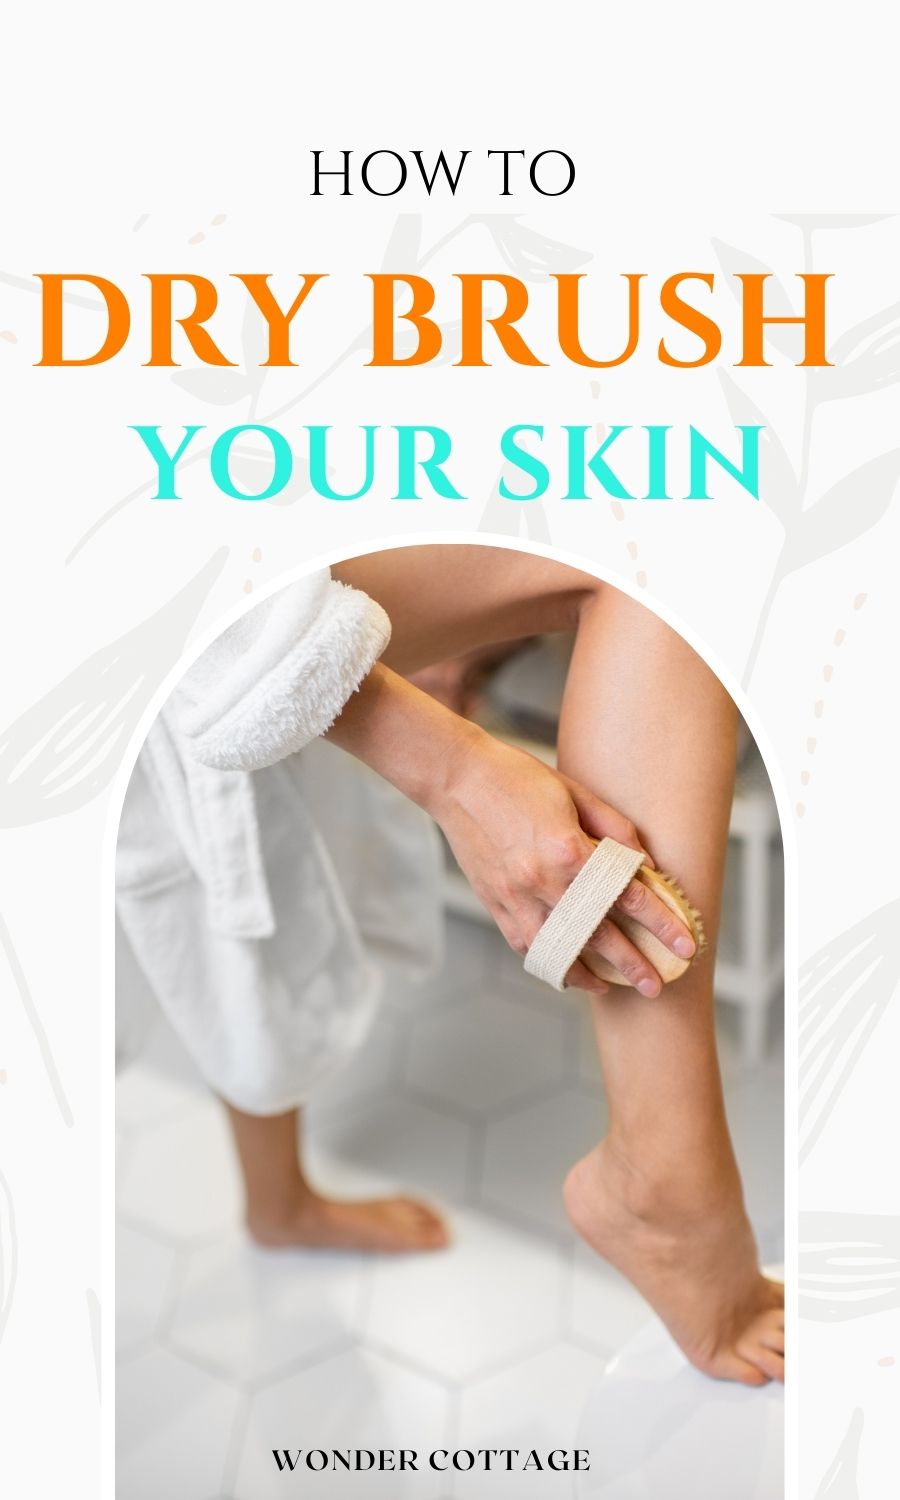 How to dry brush your skin